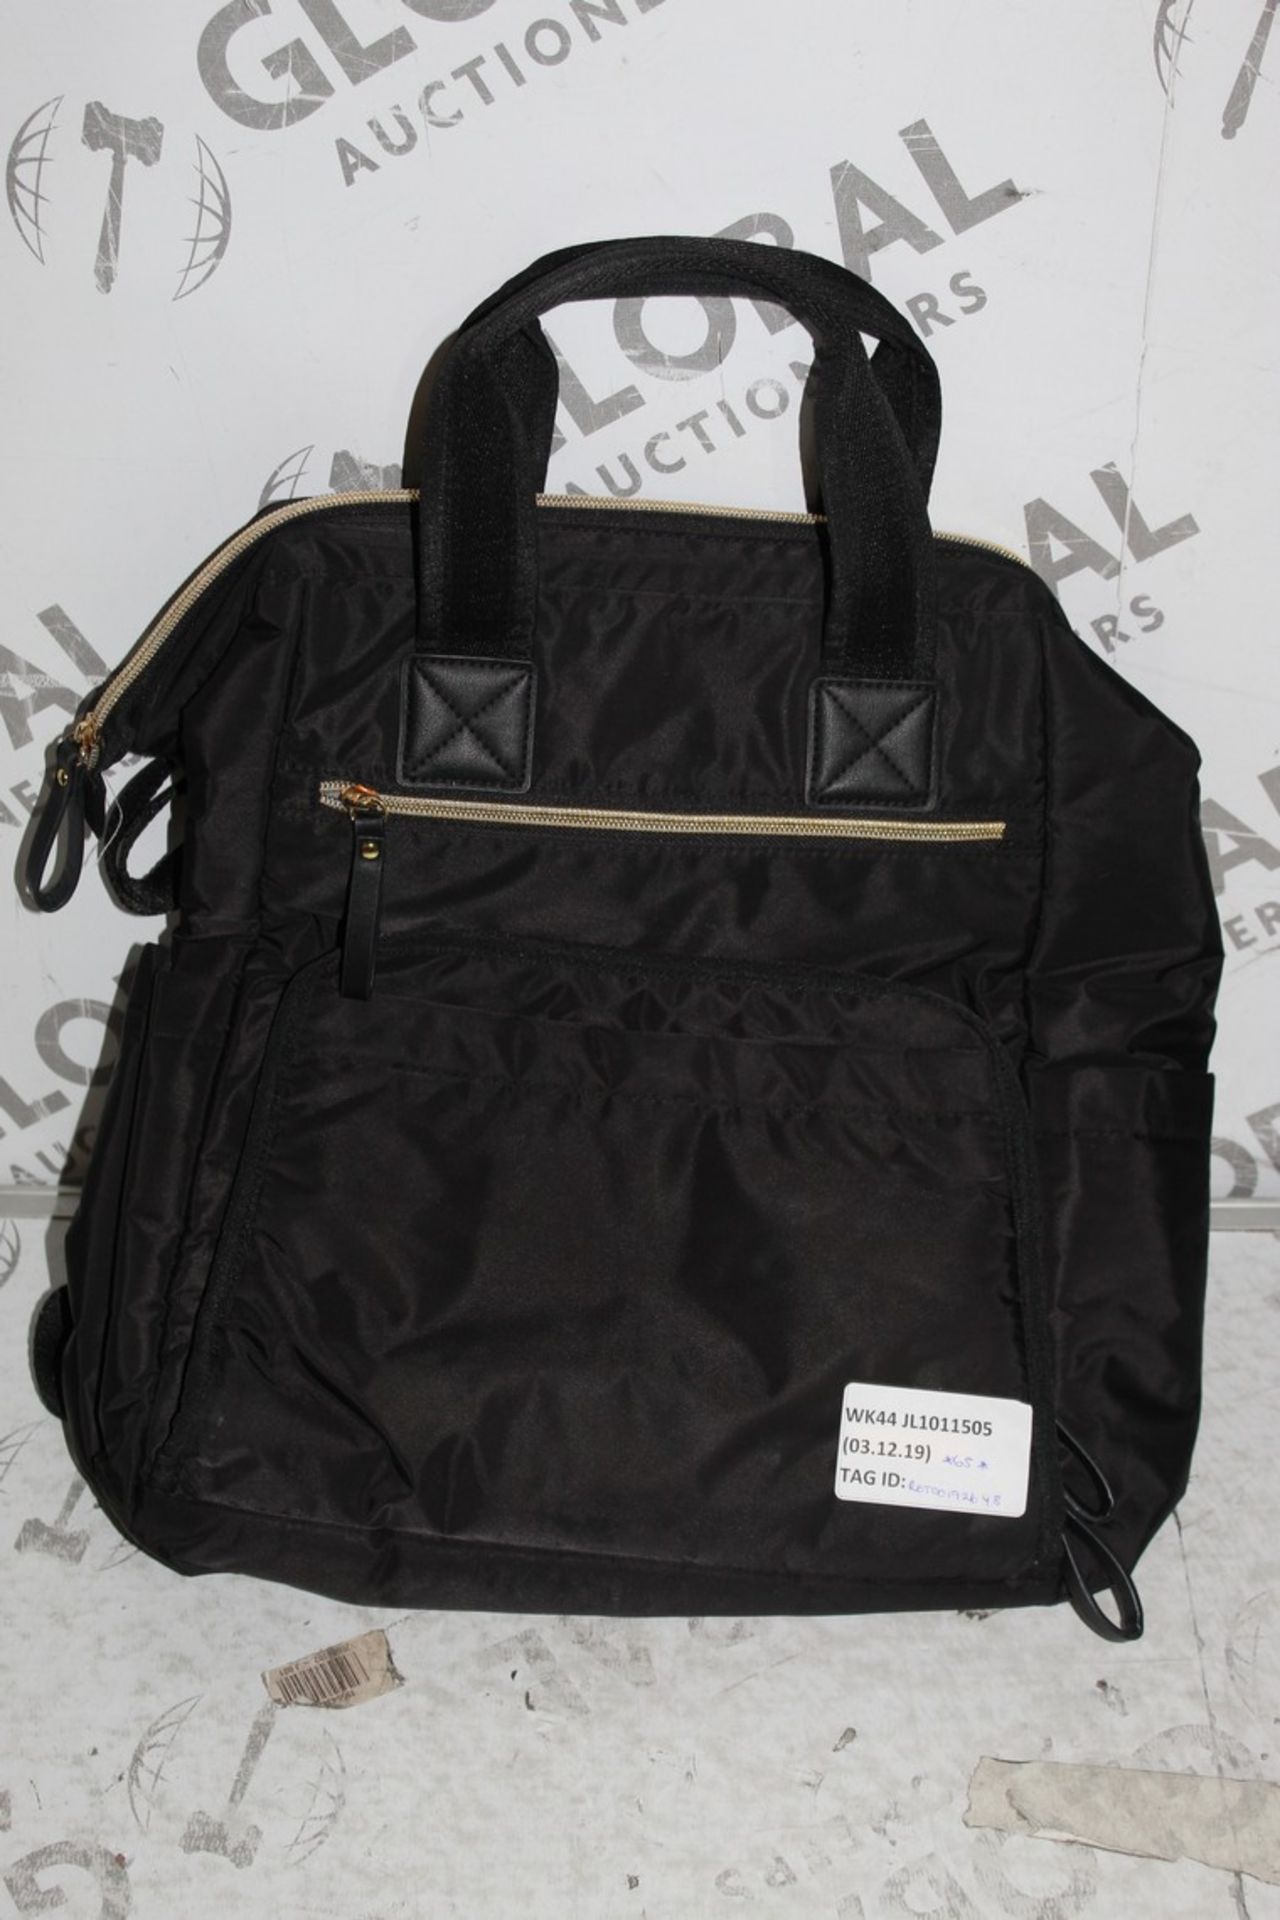 Skiphop Black Children's Changing Bags RRP £60 Each (RET00192648)(3610064) (Public Viewing and